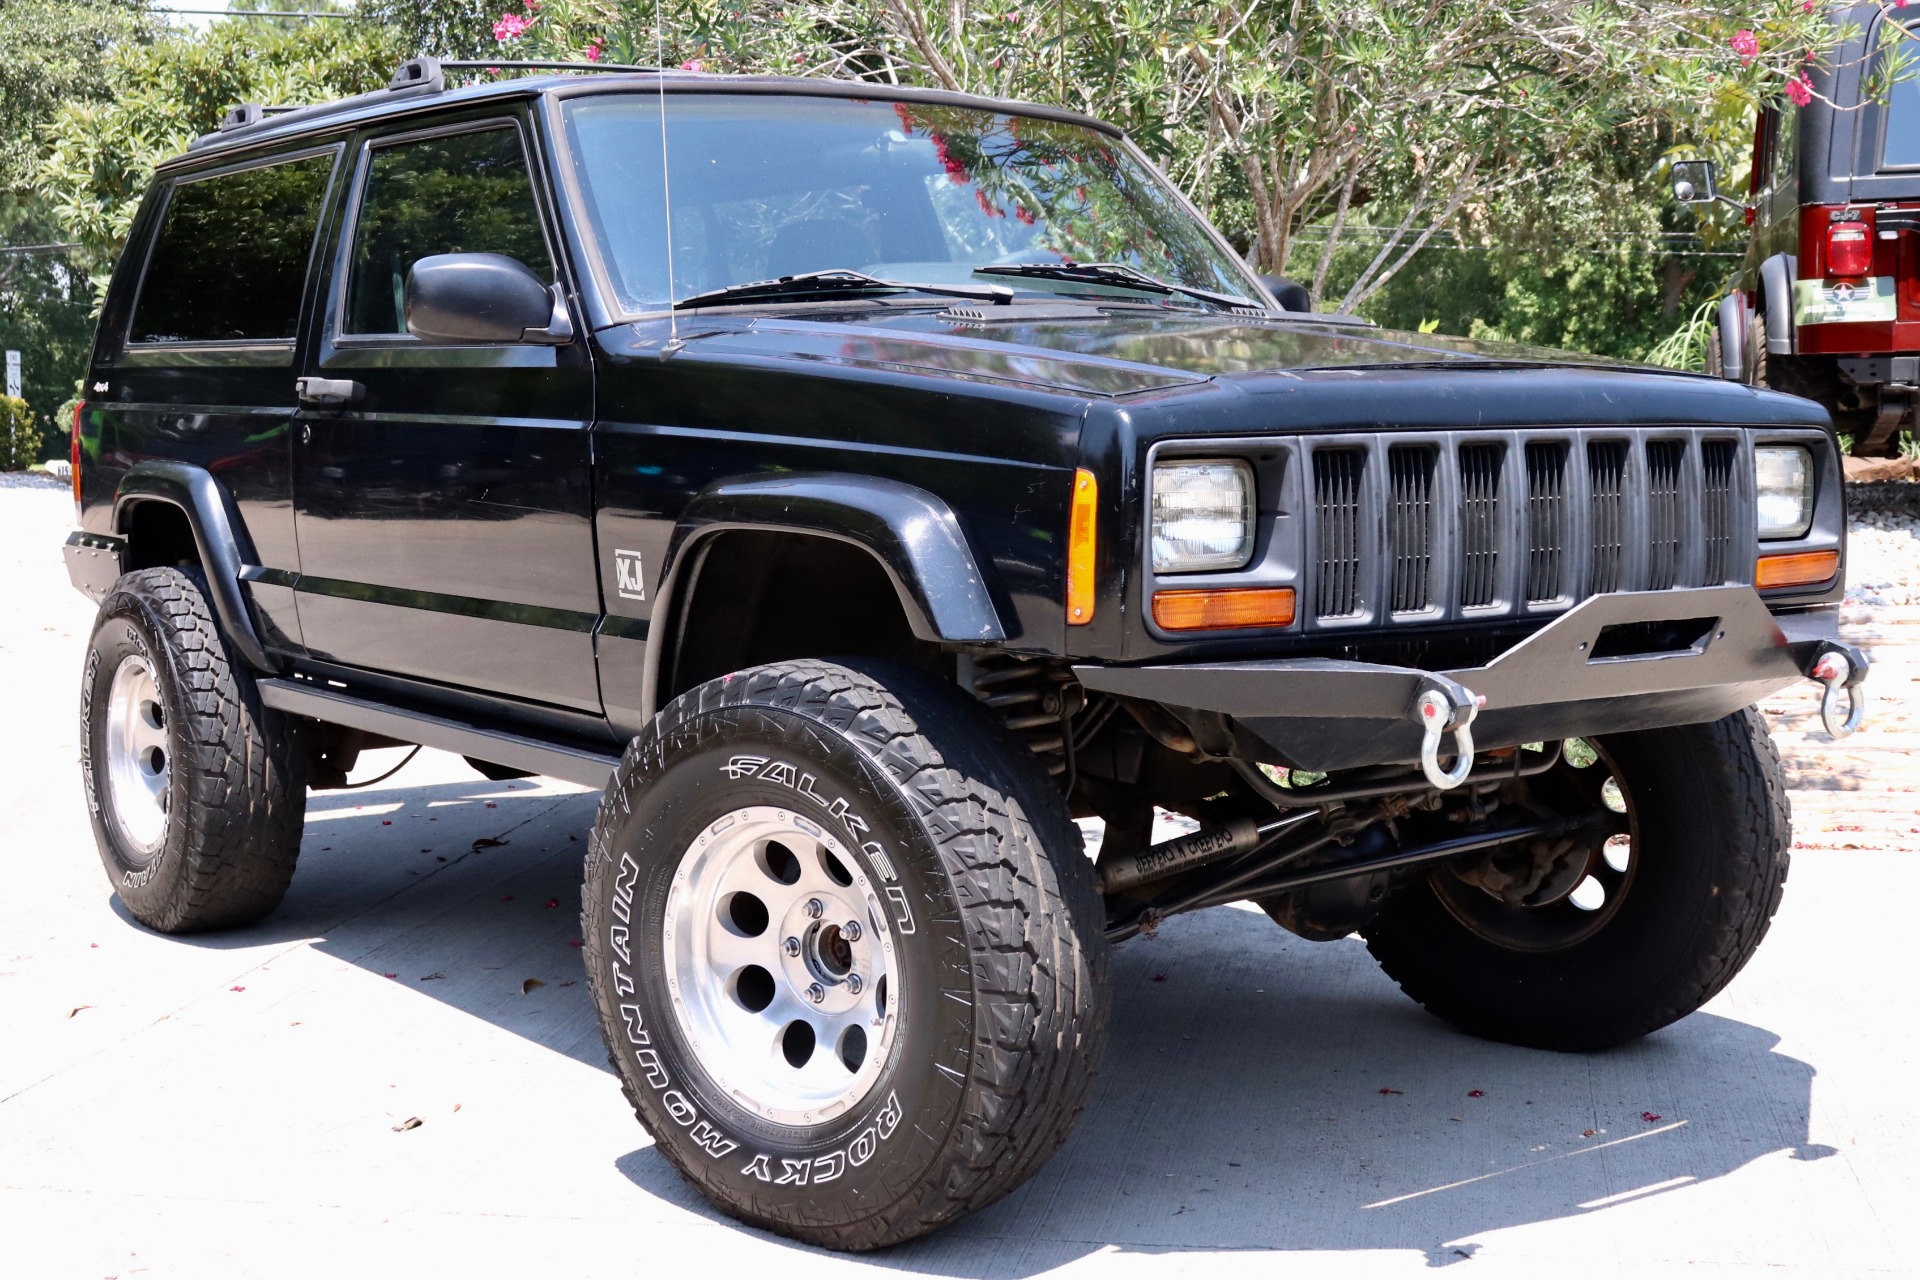 Rood Charles Keasing Auroch Used 2000 Jeep Cherokee 2dr Sport 4WD For Sale ($6,995) | Select Jeeps Inc.  Stock #206160